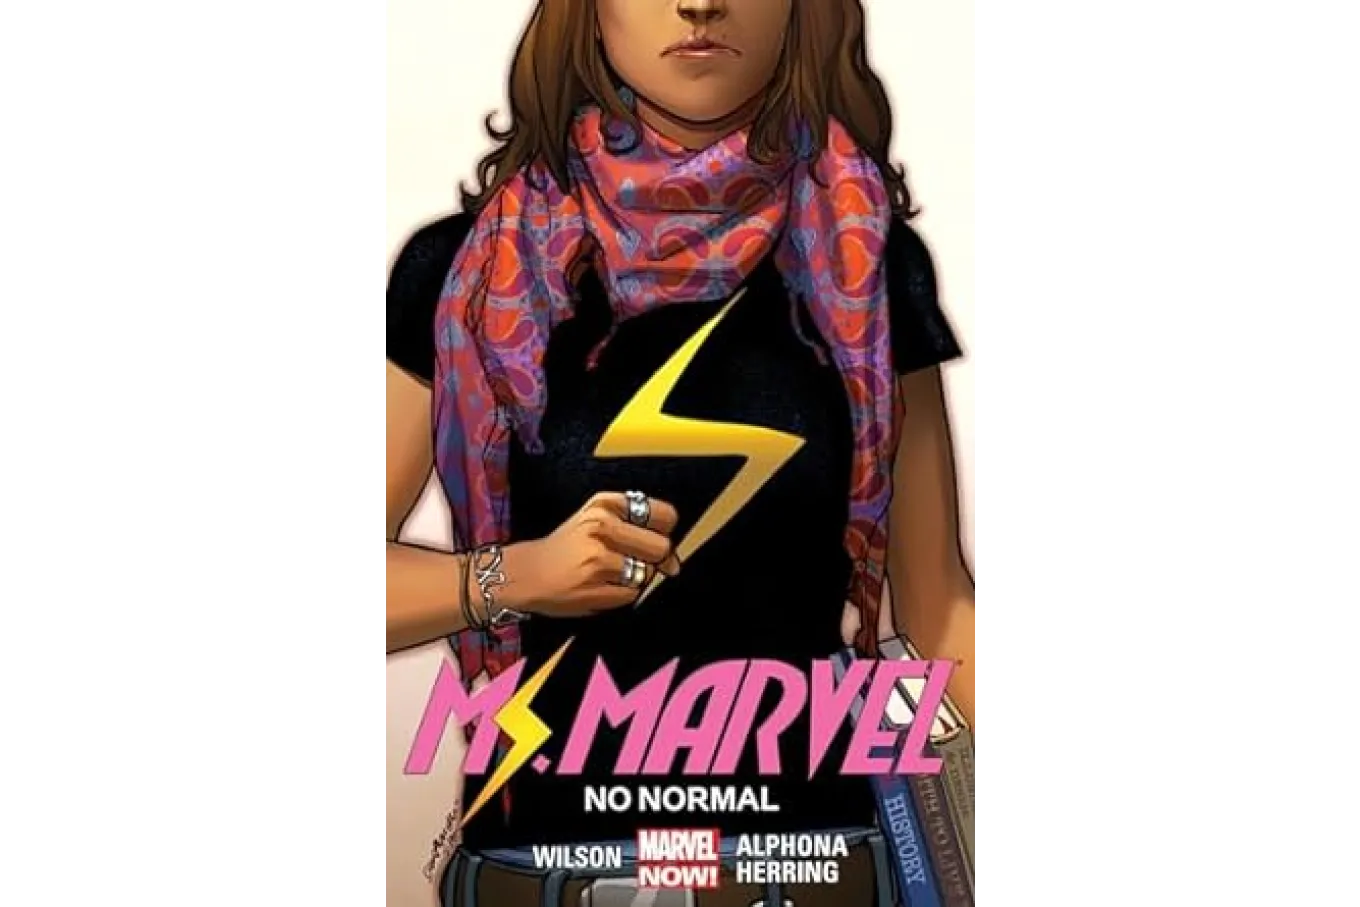 Cover of Ms. Marvel